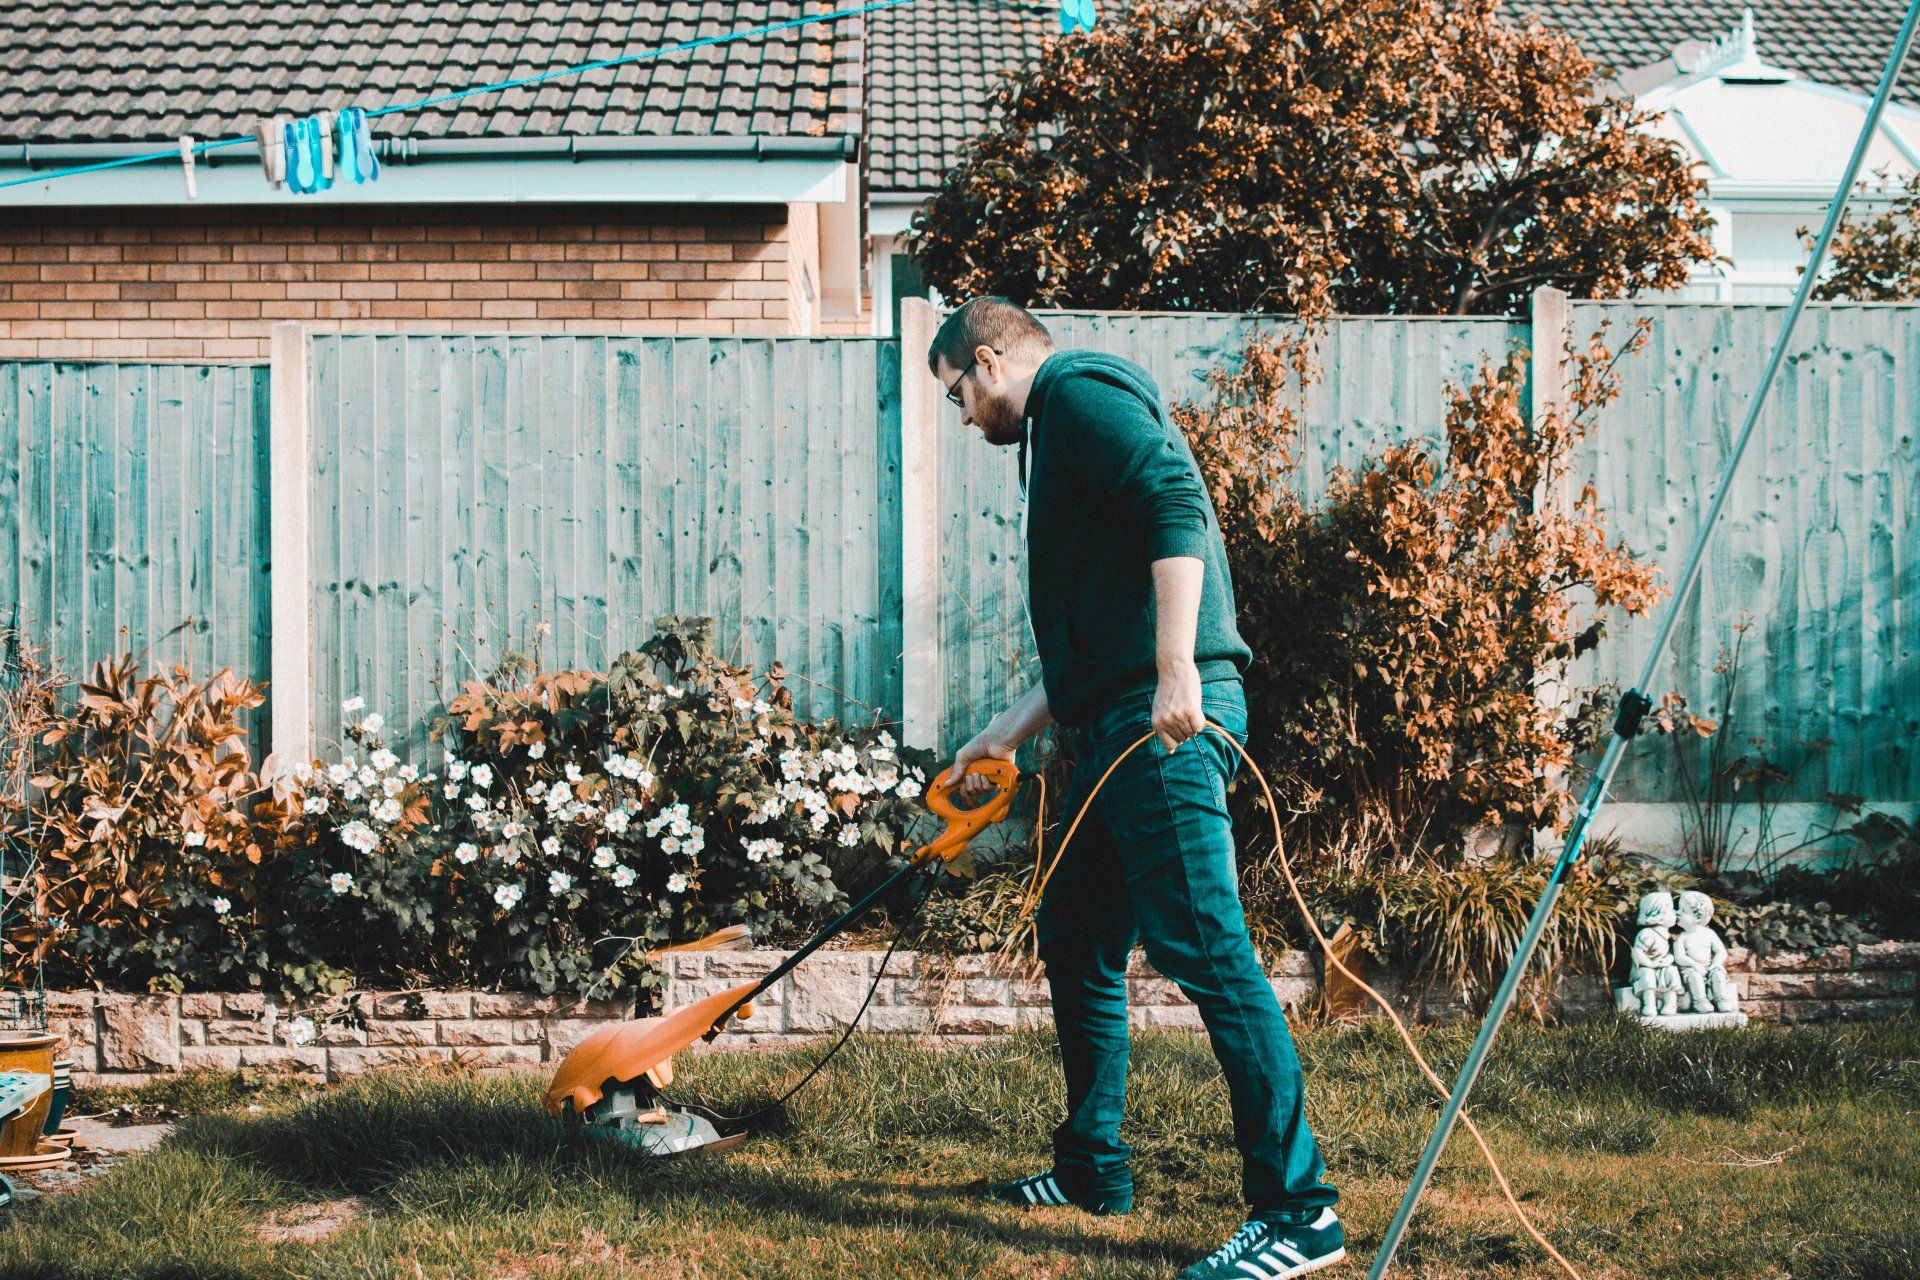 Image of a man trimming a lawn